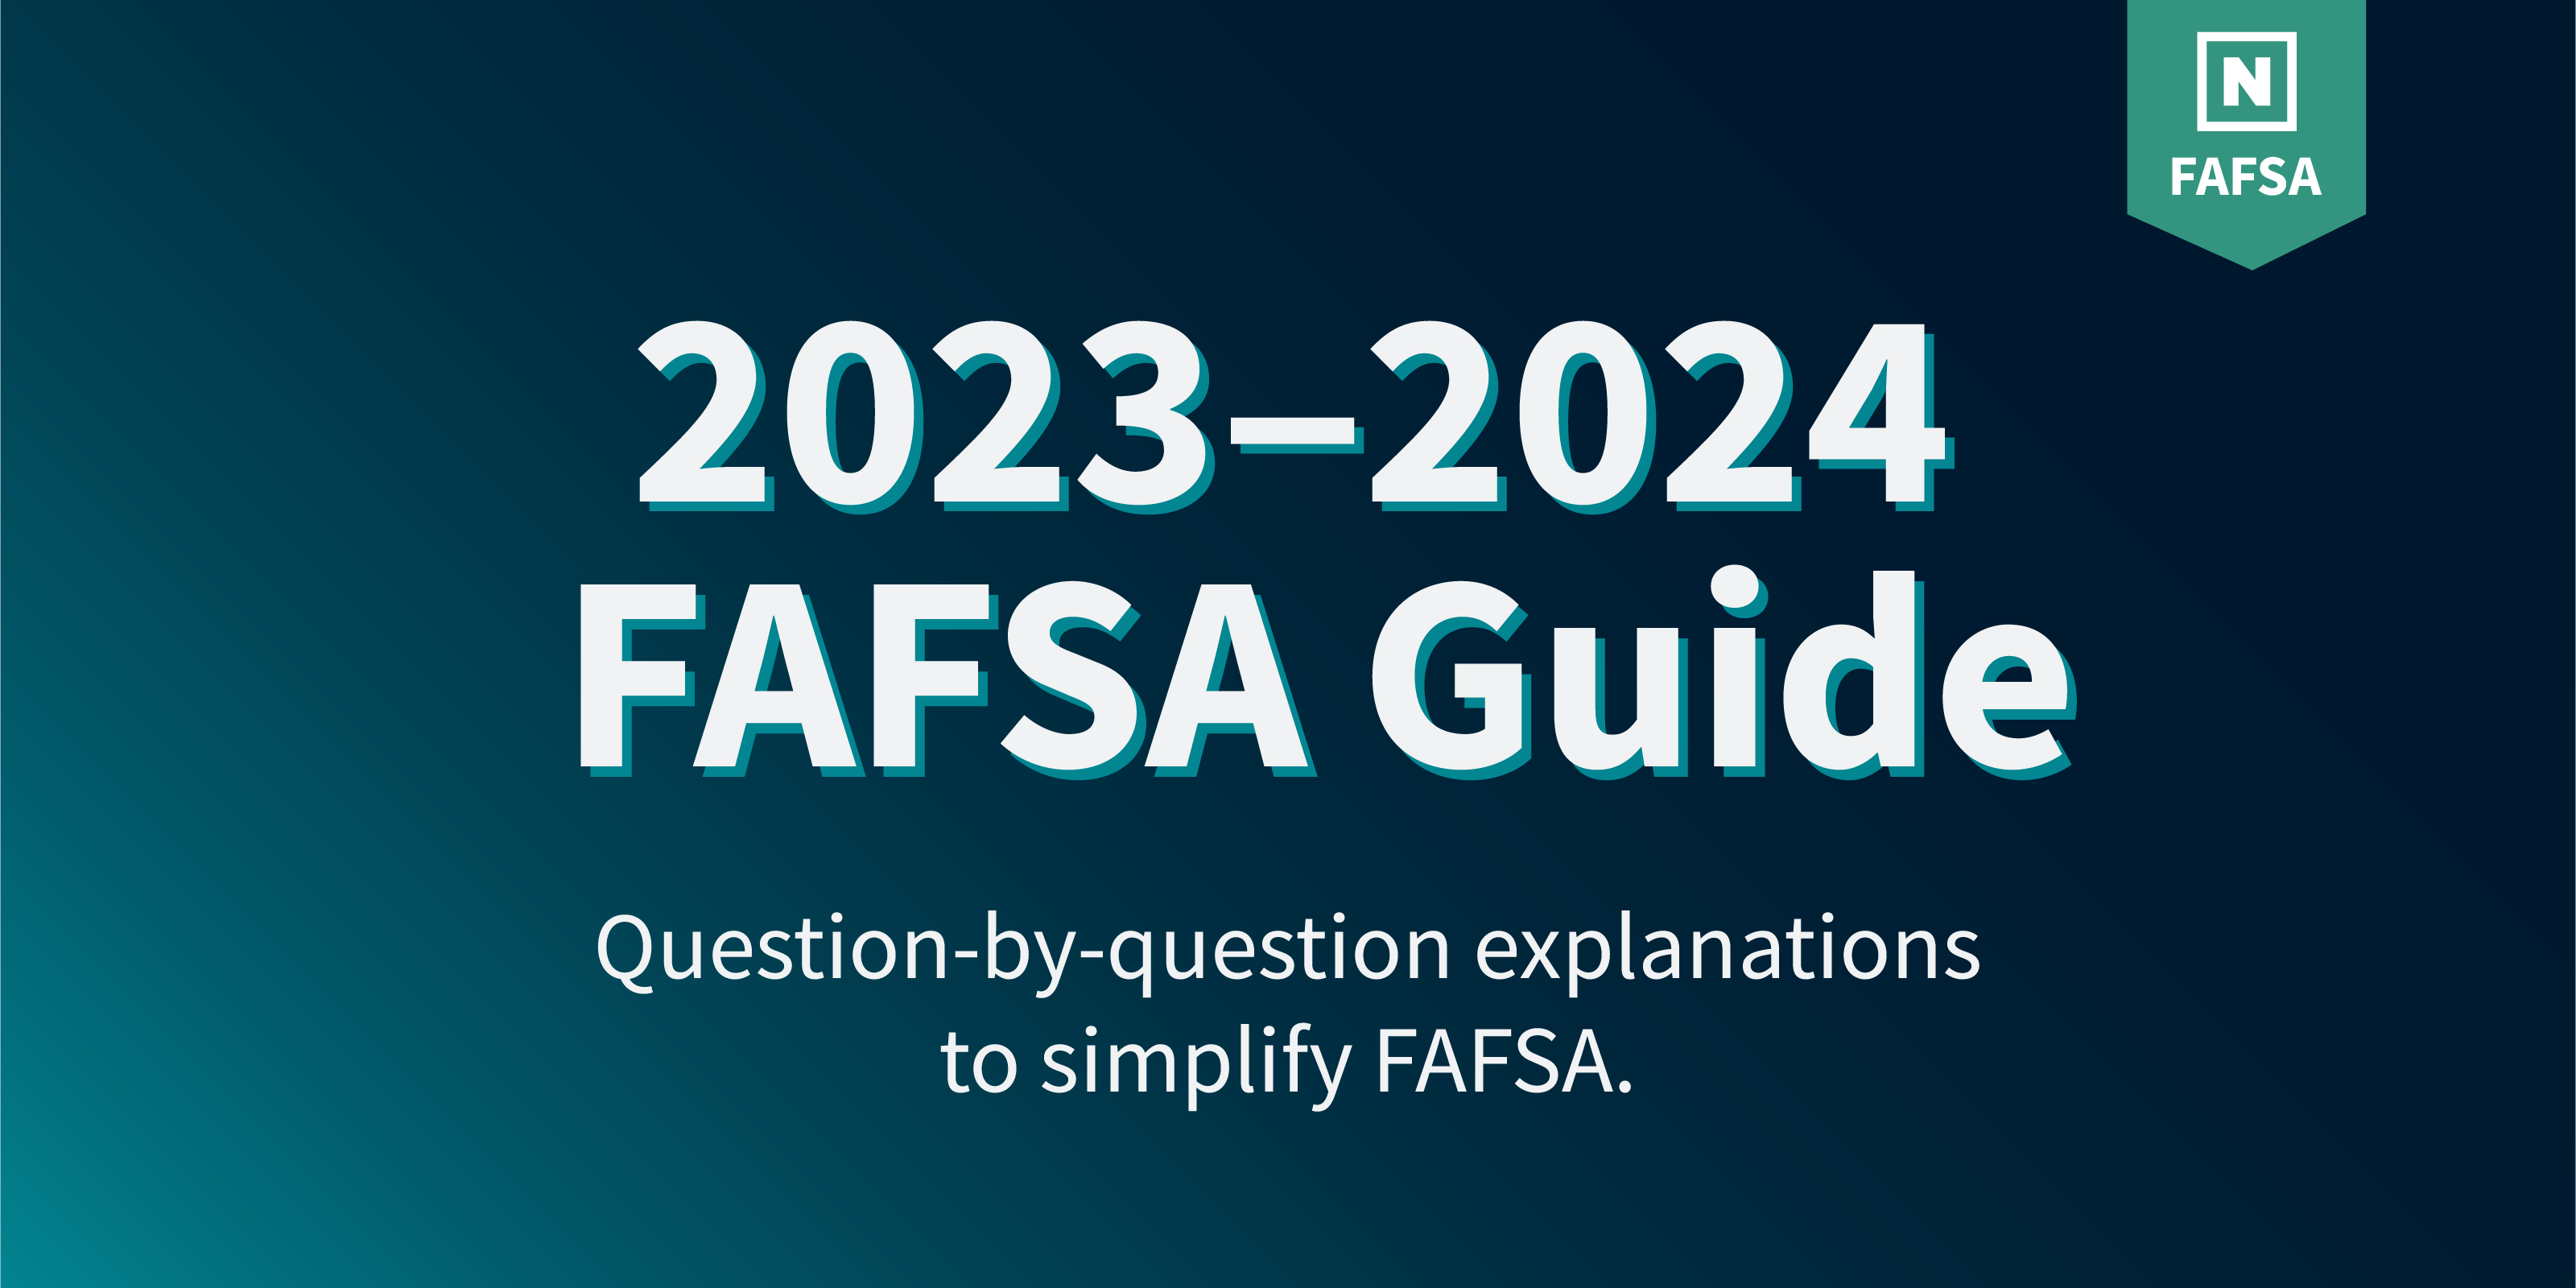 A Step-By-Step Guide To Completing The 2023-2024 FAFSA Questions